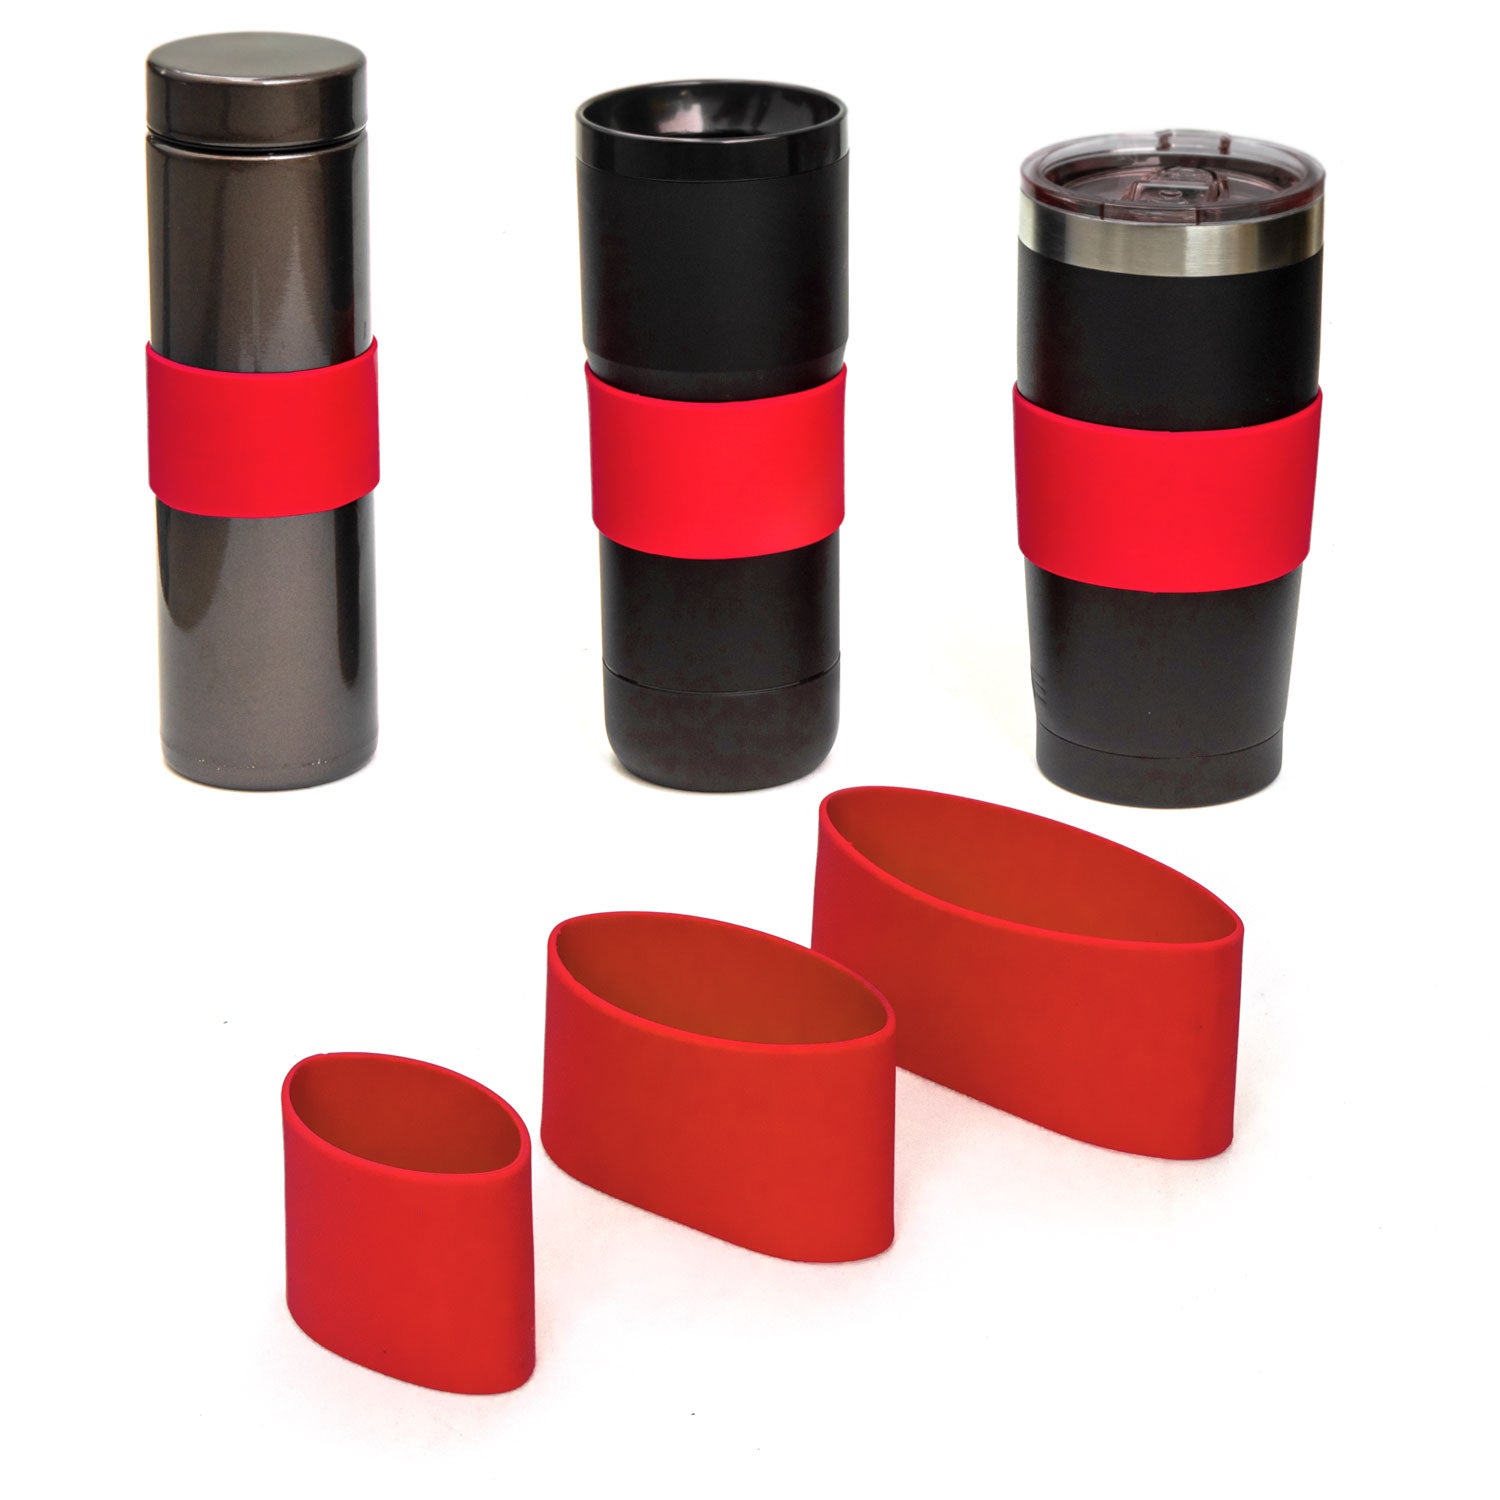 Grifiti Band Joes Silicone Grip Bands 3 Pack Assorted Sizes Mugs Cups Bottles Knobs Dumbbells, Red